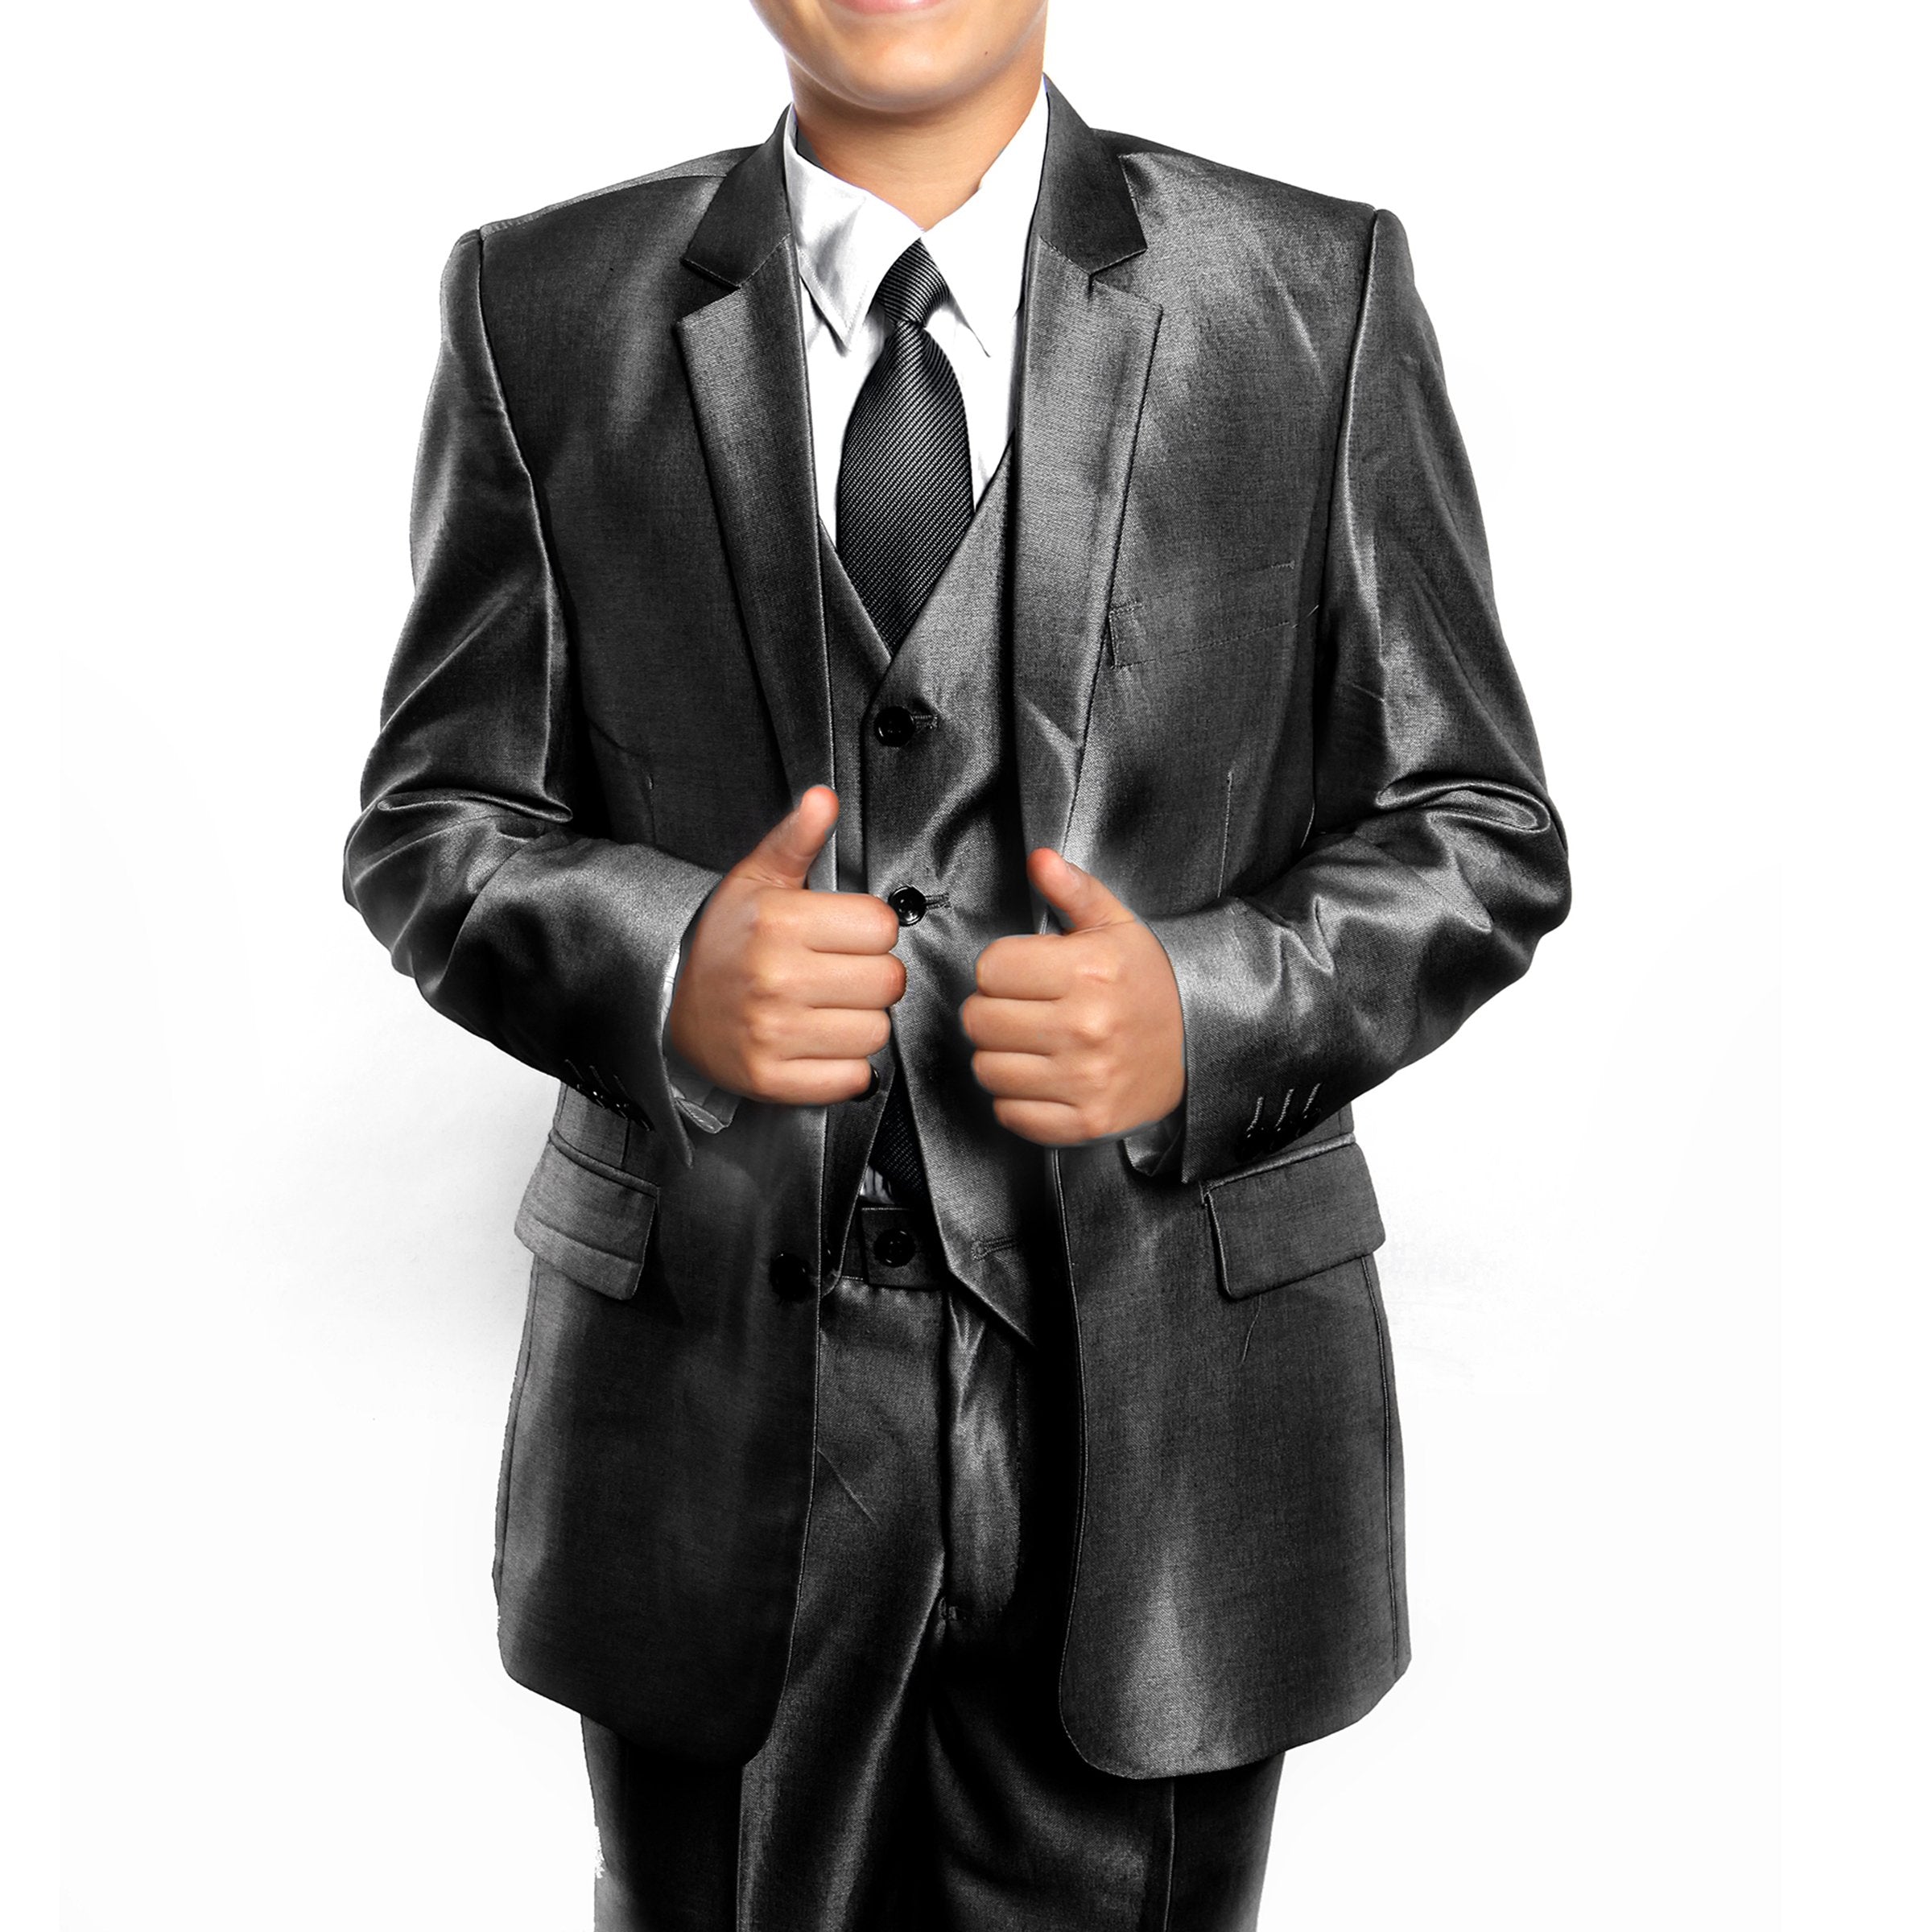 3-PC Boy's Solid Sharkskin Suit with Dress Shirt & Tie Suits For Boy's